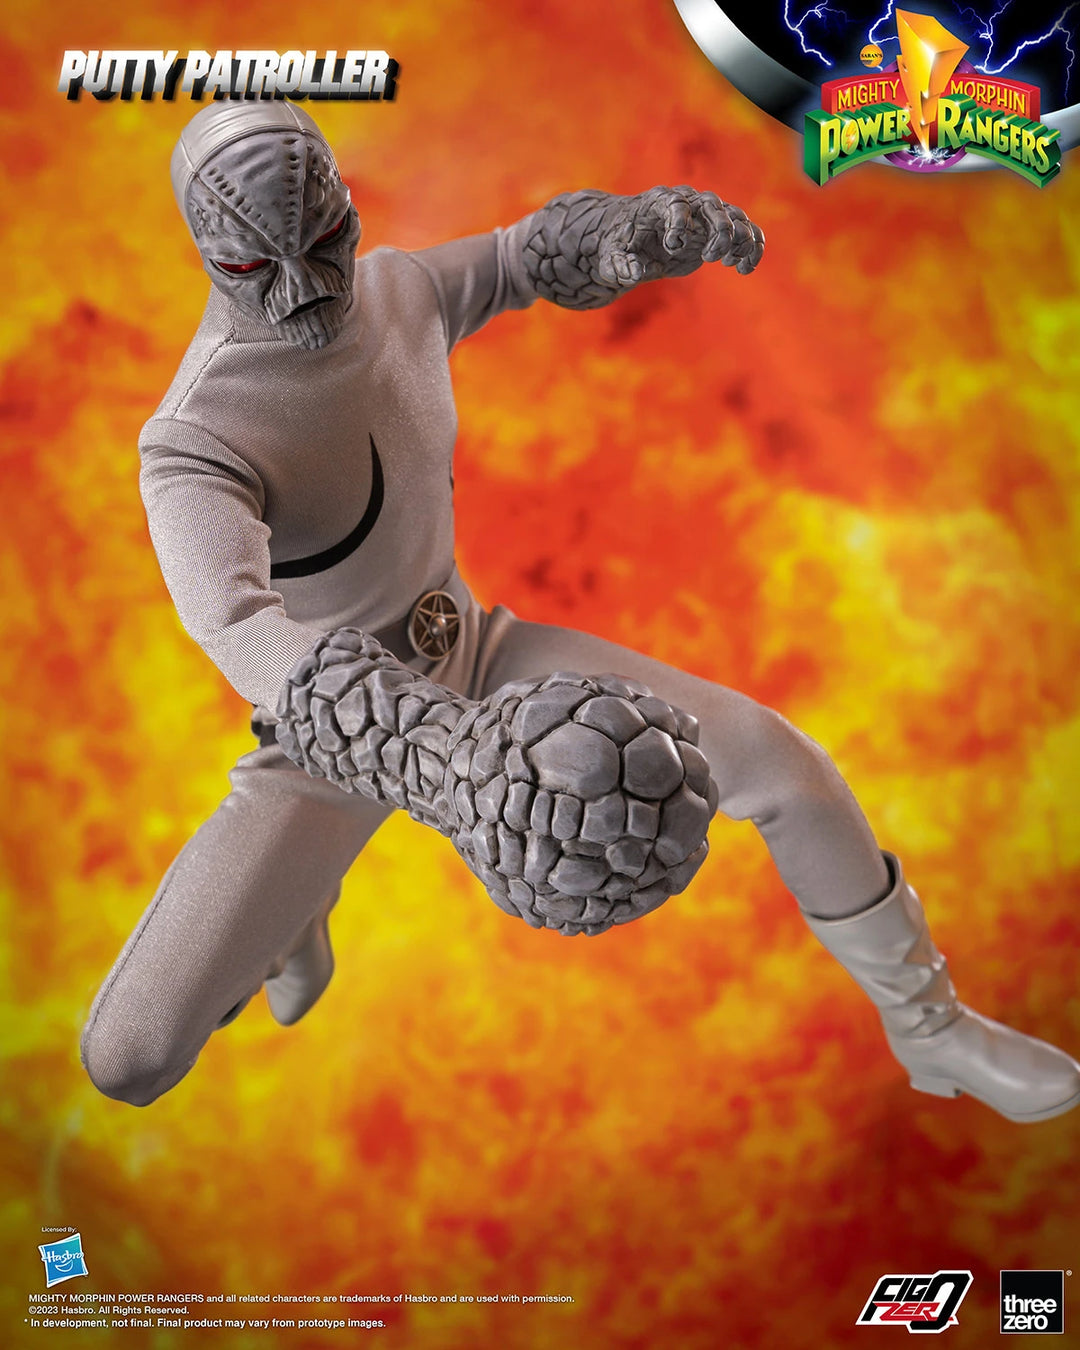 Mighty Morphin Power Rangers FigZero Putty Patroller 1/6 Scale Figure